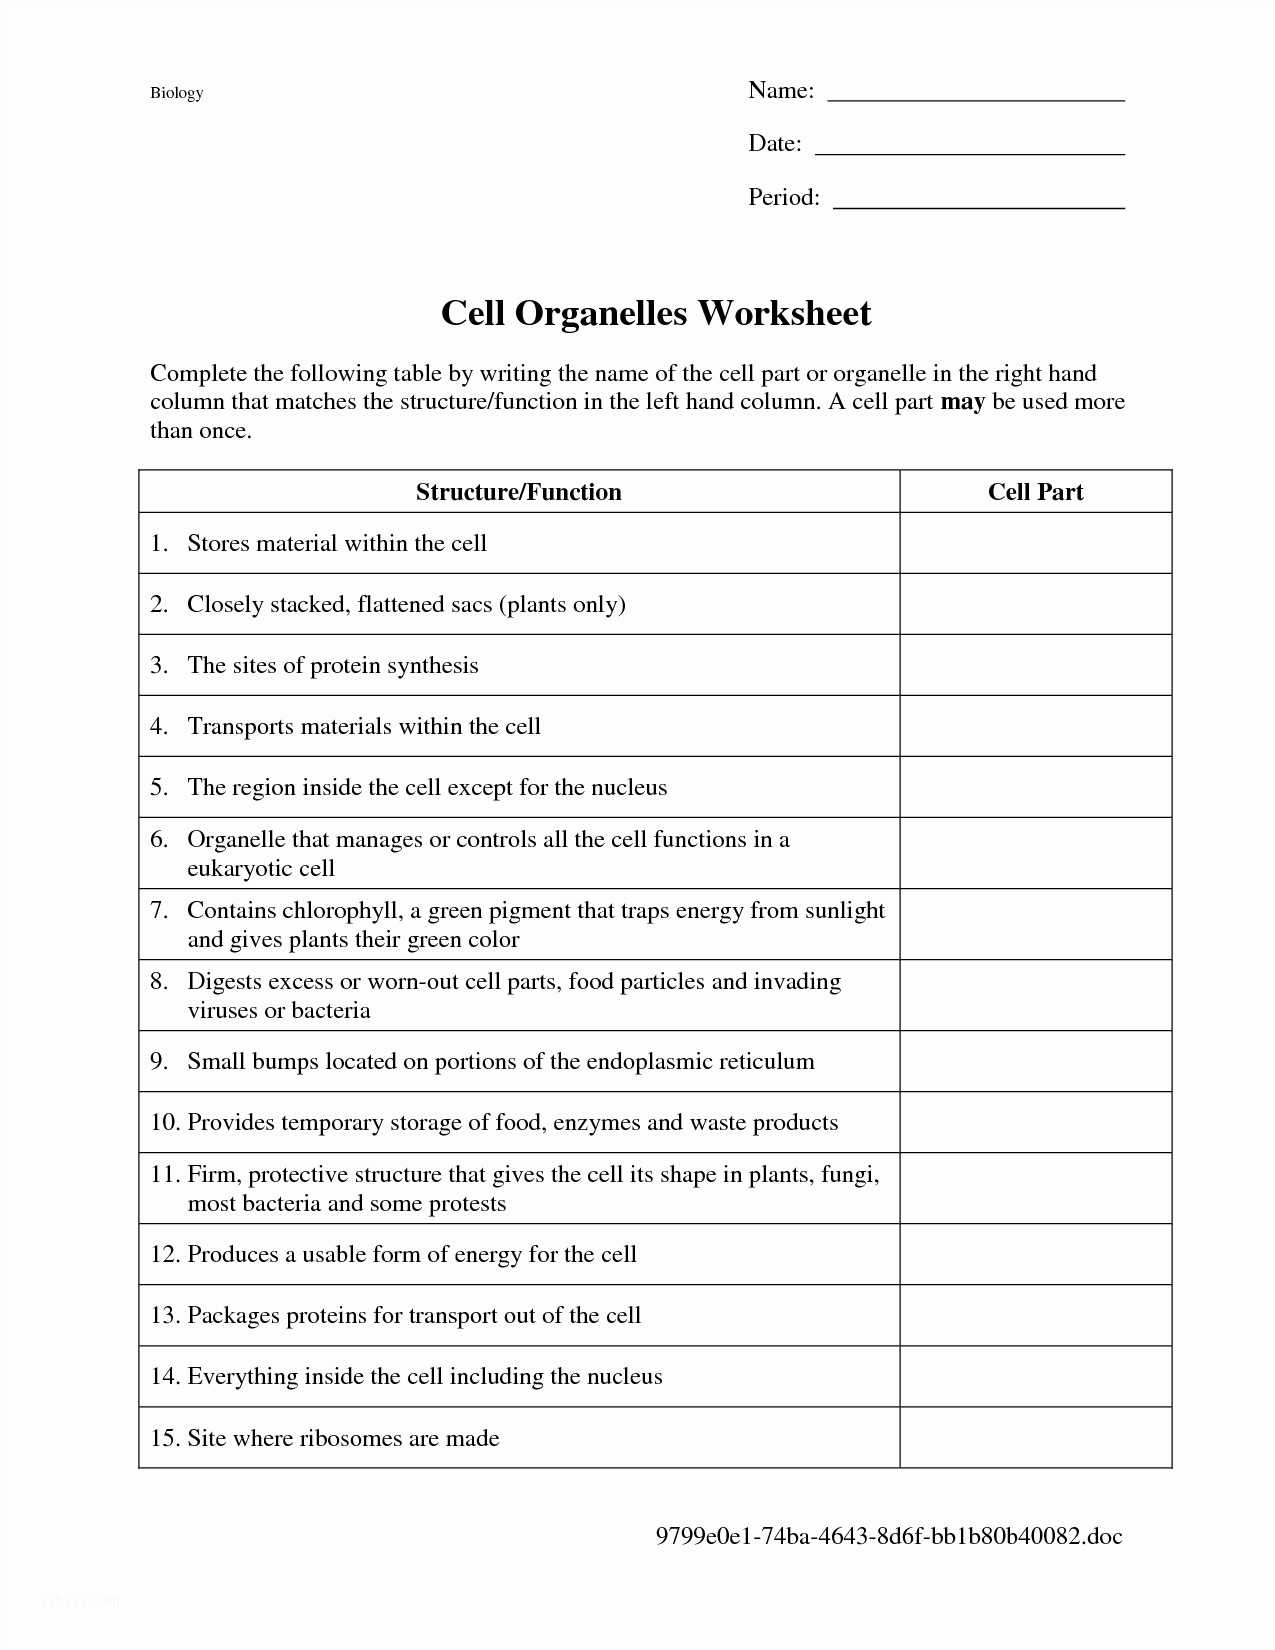 Cell Cycle Worksheet Answers Biology or Cells Alive Cell Cycle Worksheet Answers Fresh Cell organelles